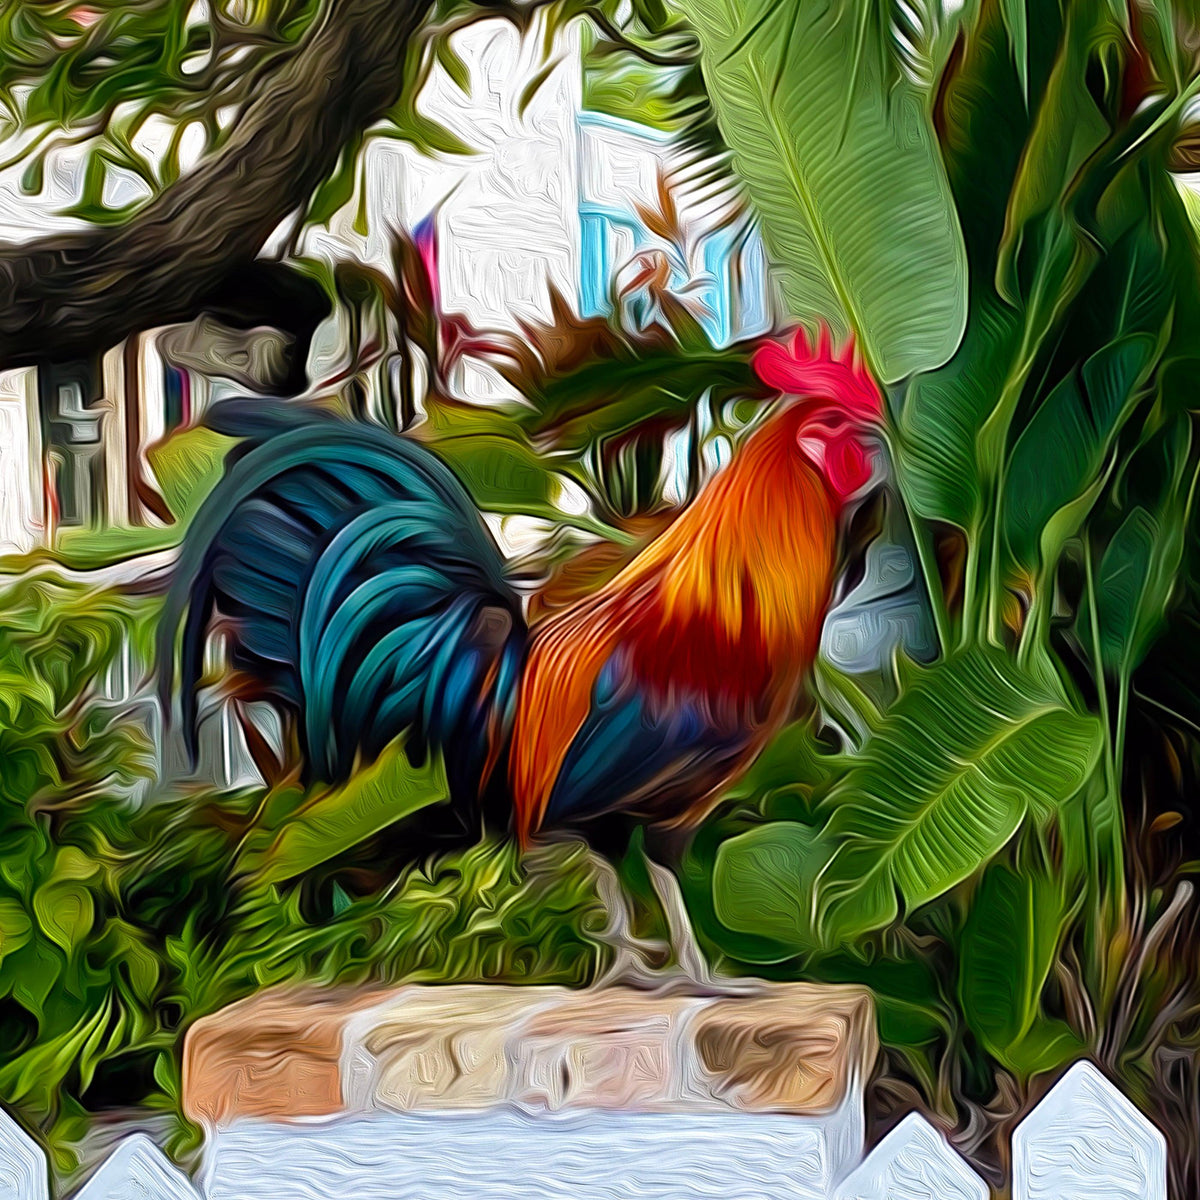 "Perched" - Backyards of Key West Gallery